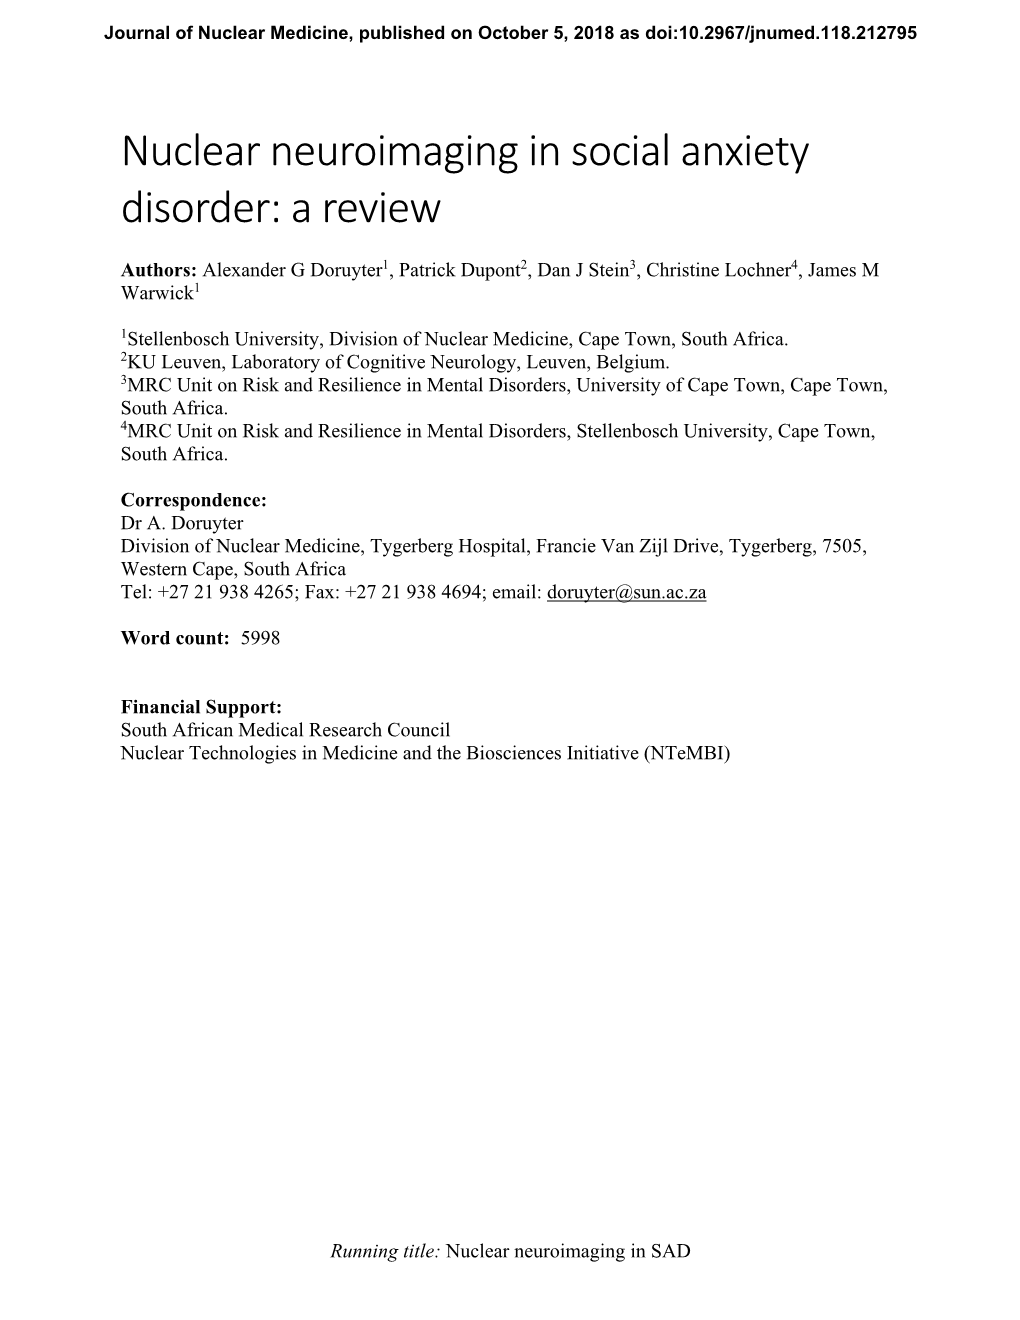 Nuclear Neuroimaging in Social Anxiety Disorder: a Review